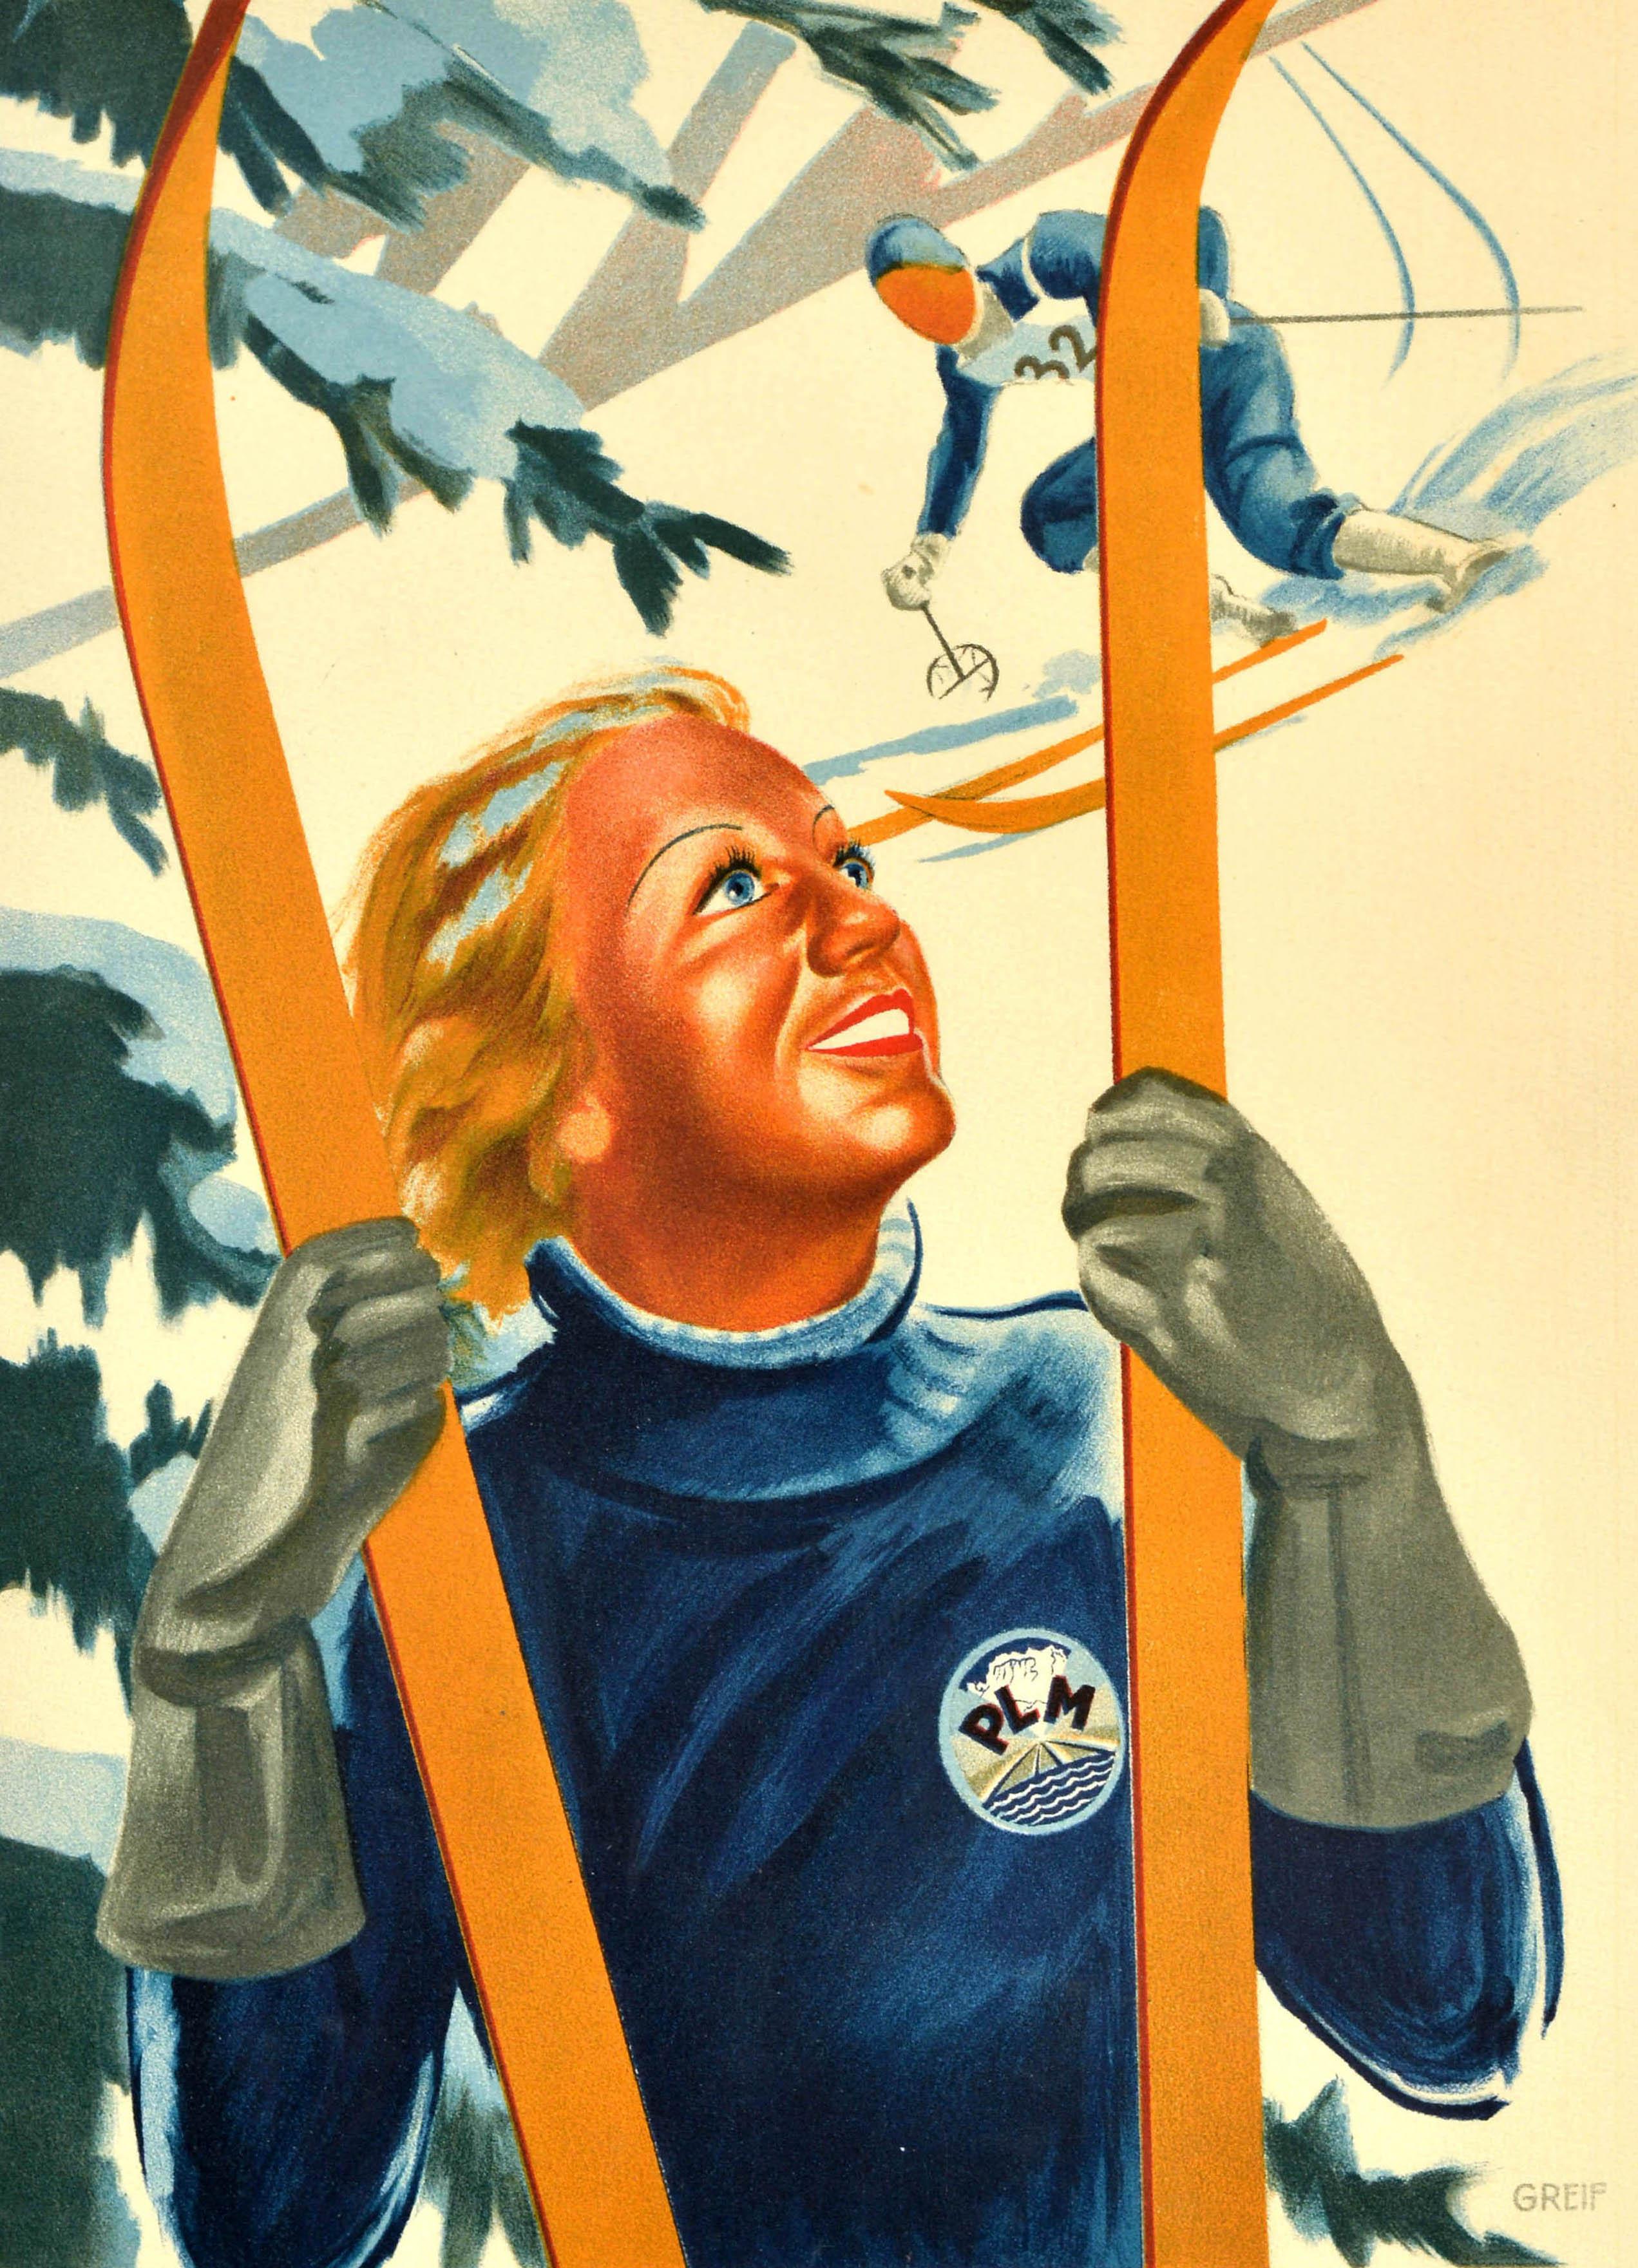 Original vintage winter sport and skiing travel poster - Alpes & Jura Eight days of winter sports A whole year of health / Huit jours de sports d'hiver Toute une annee de sante - featuring artwork depicting a smiling lady in front of a snow-topped